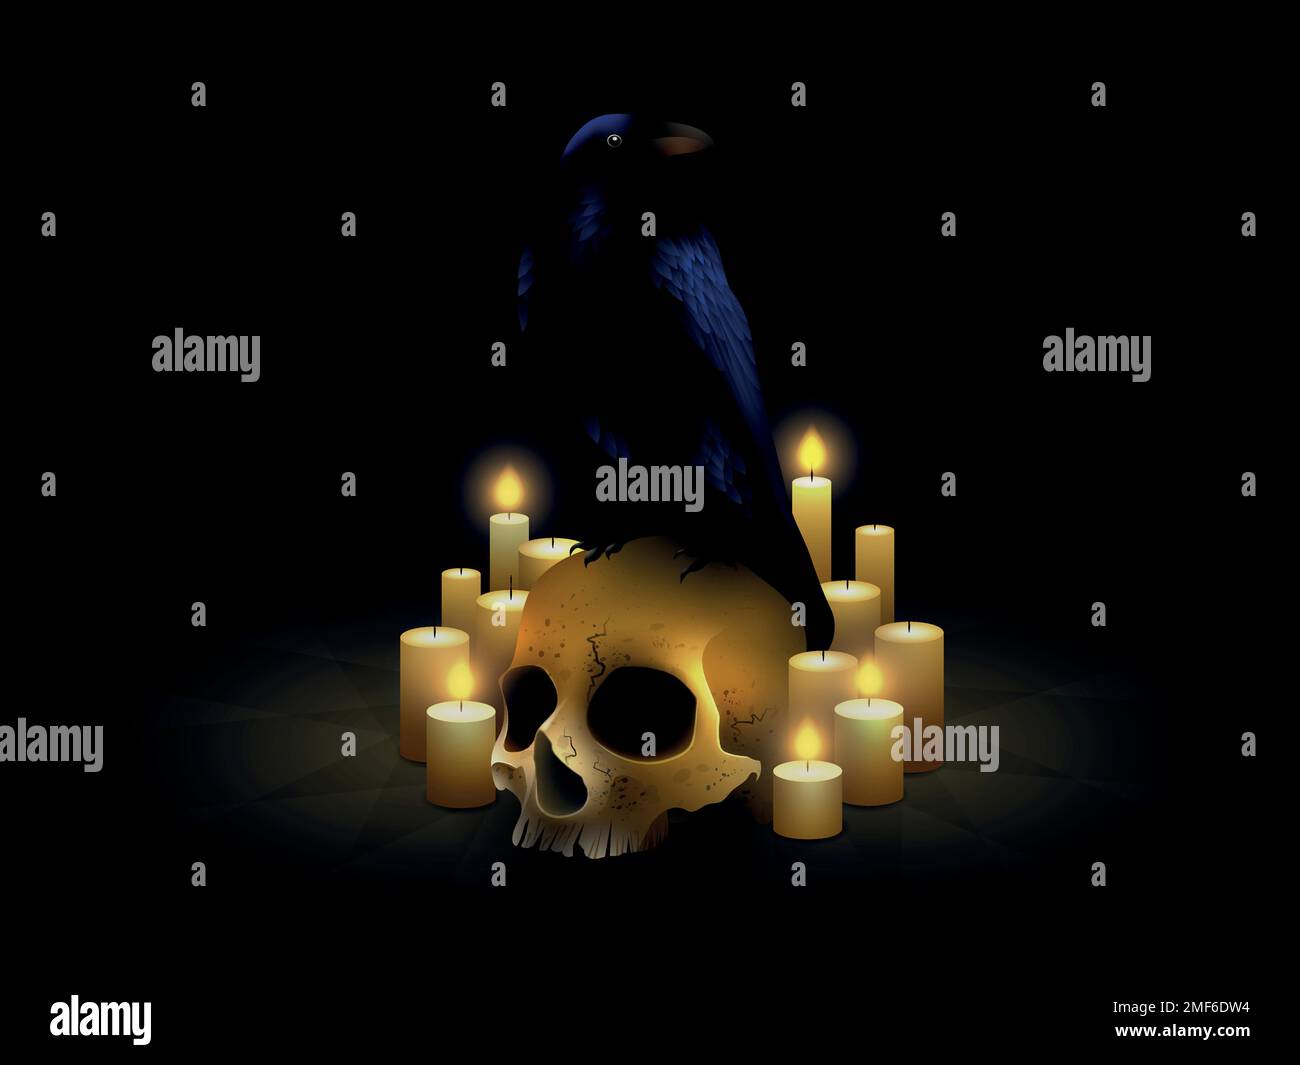 Raven sitting on a human skull surrounded by candles on a black background. Stock Vector